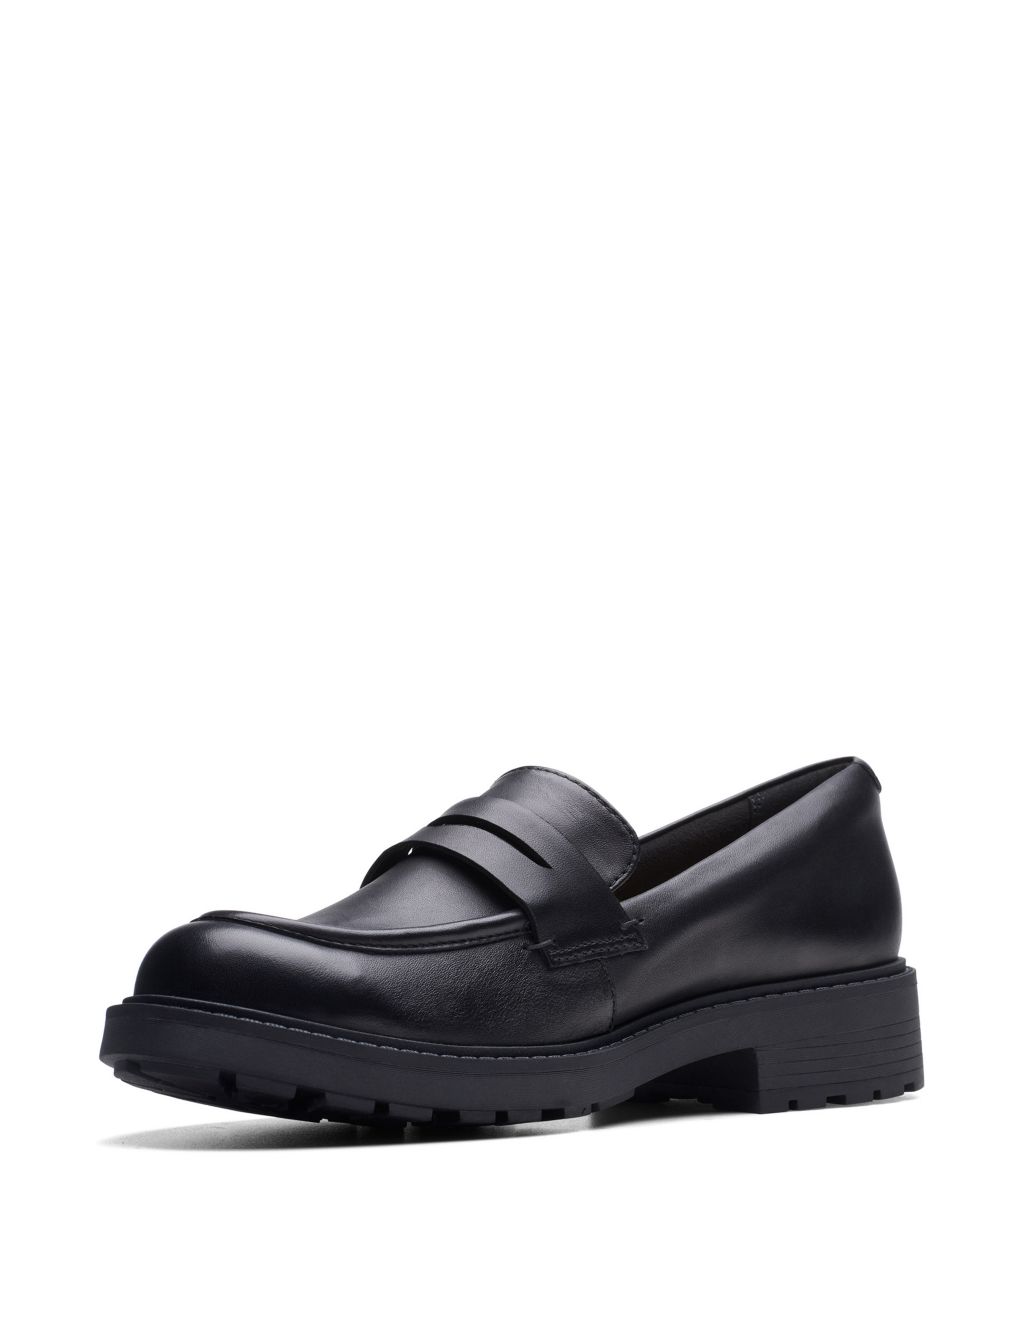 Leather Chunky Block Heel Loafers image 4